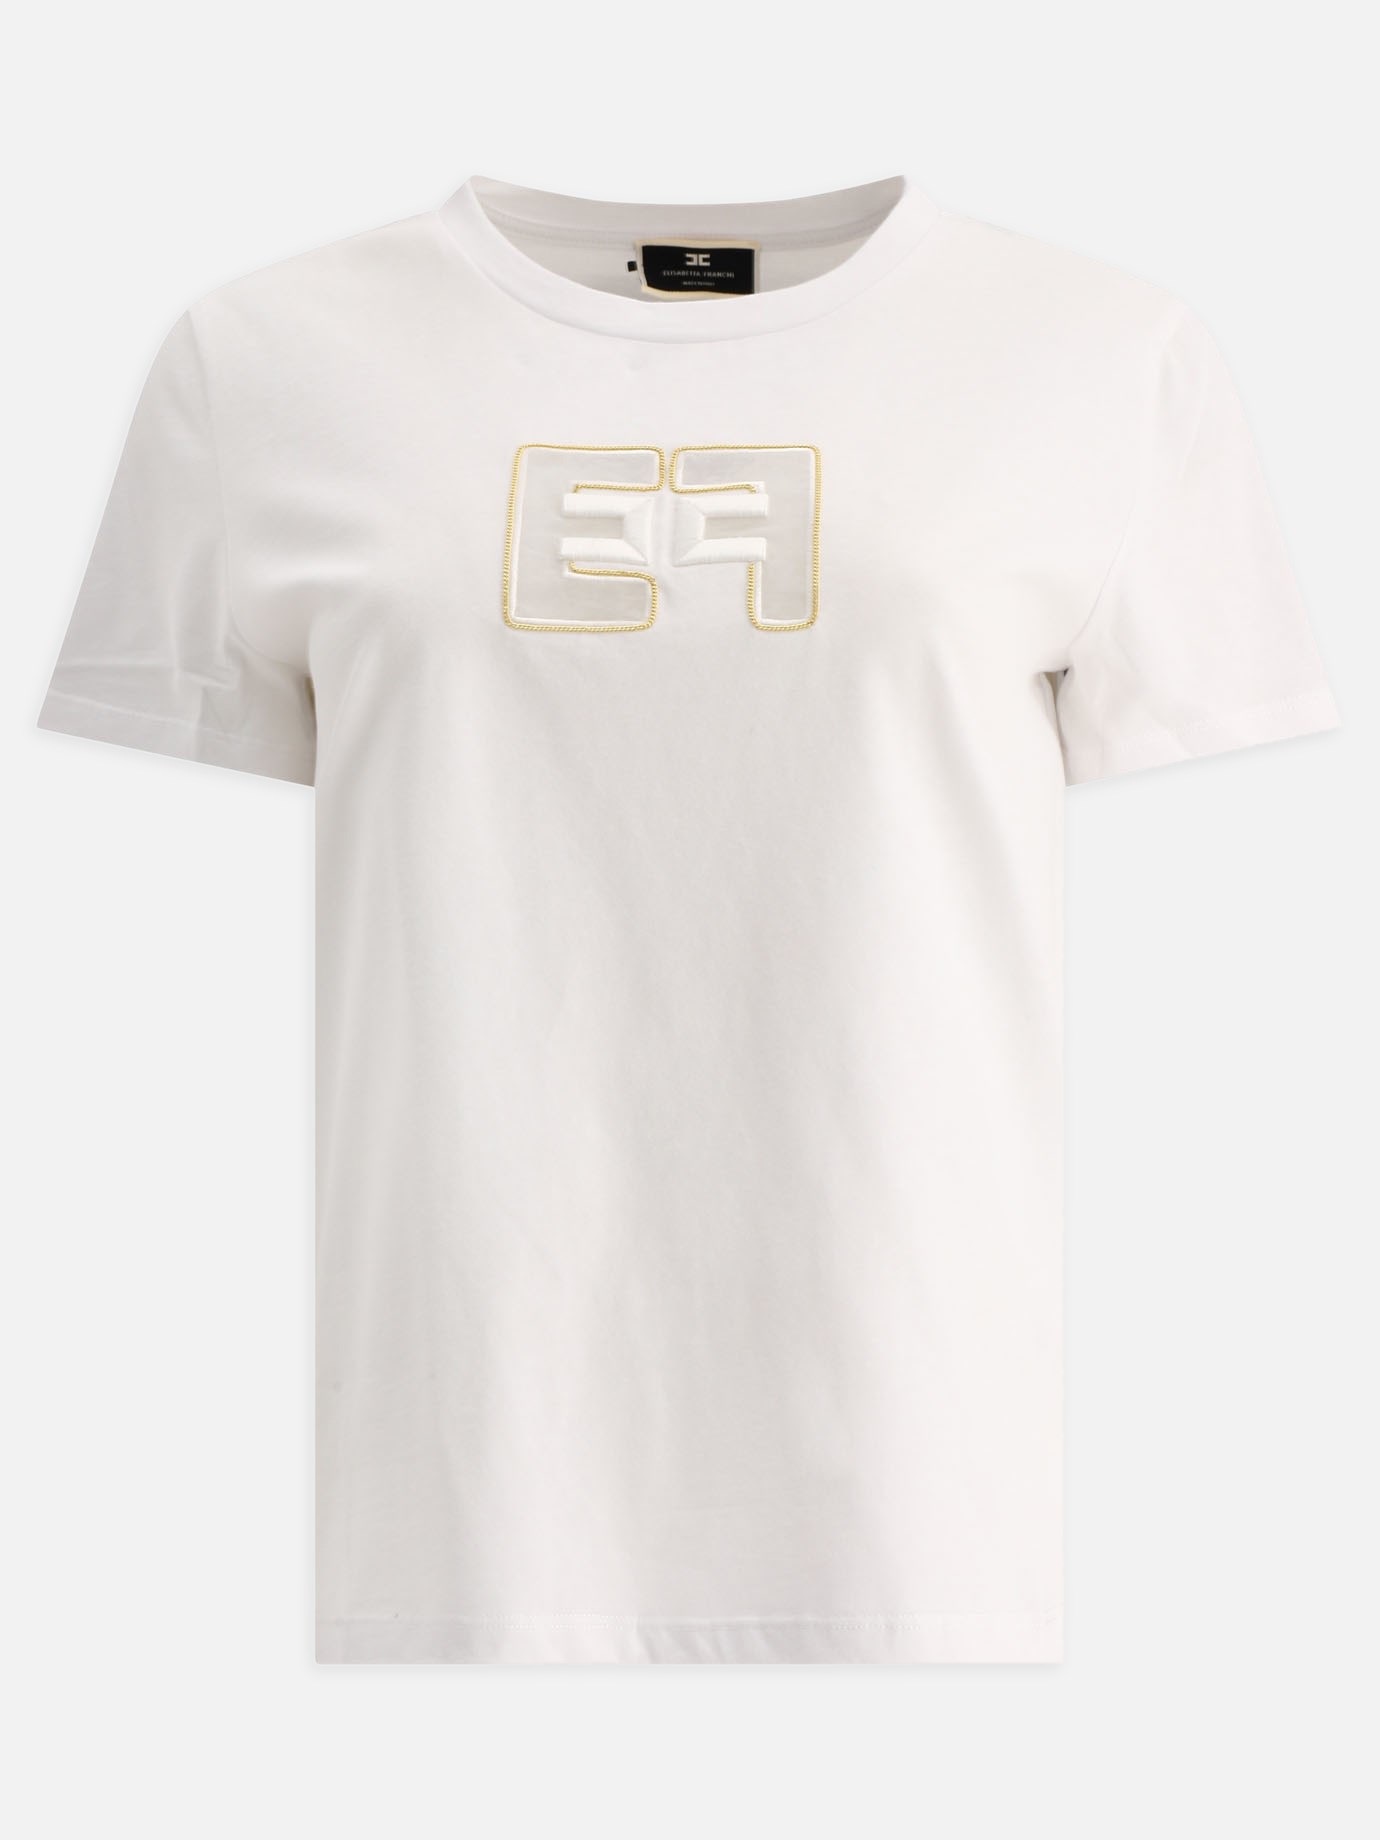 T-shirt with embroideryby Elisabetta Franchi - 5